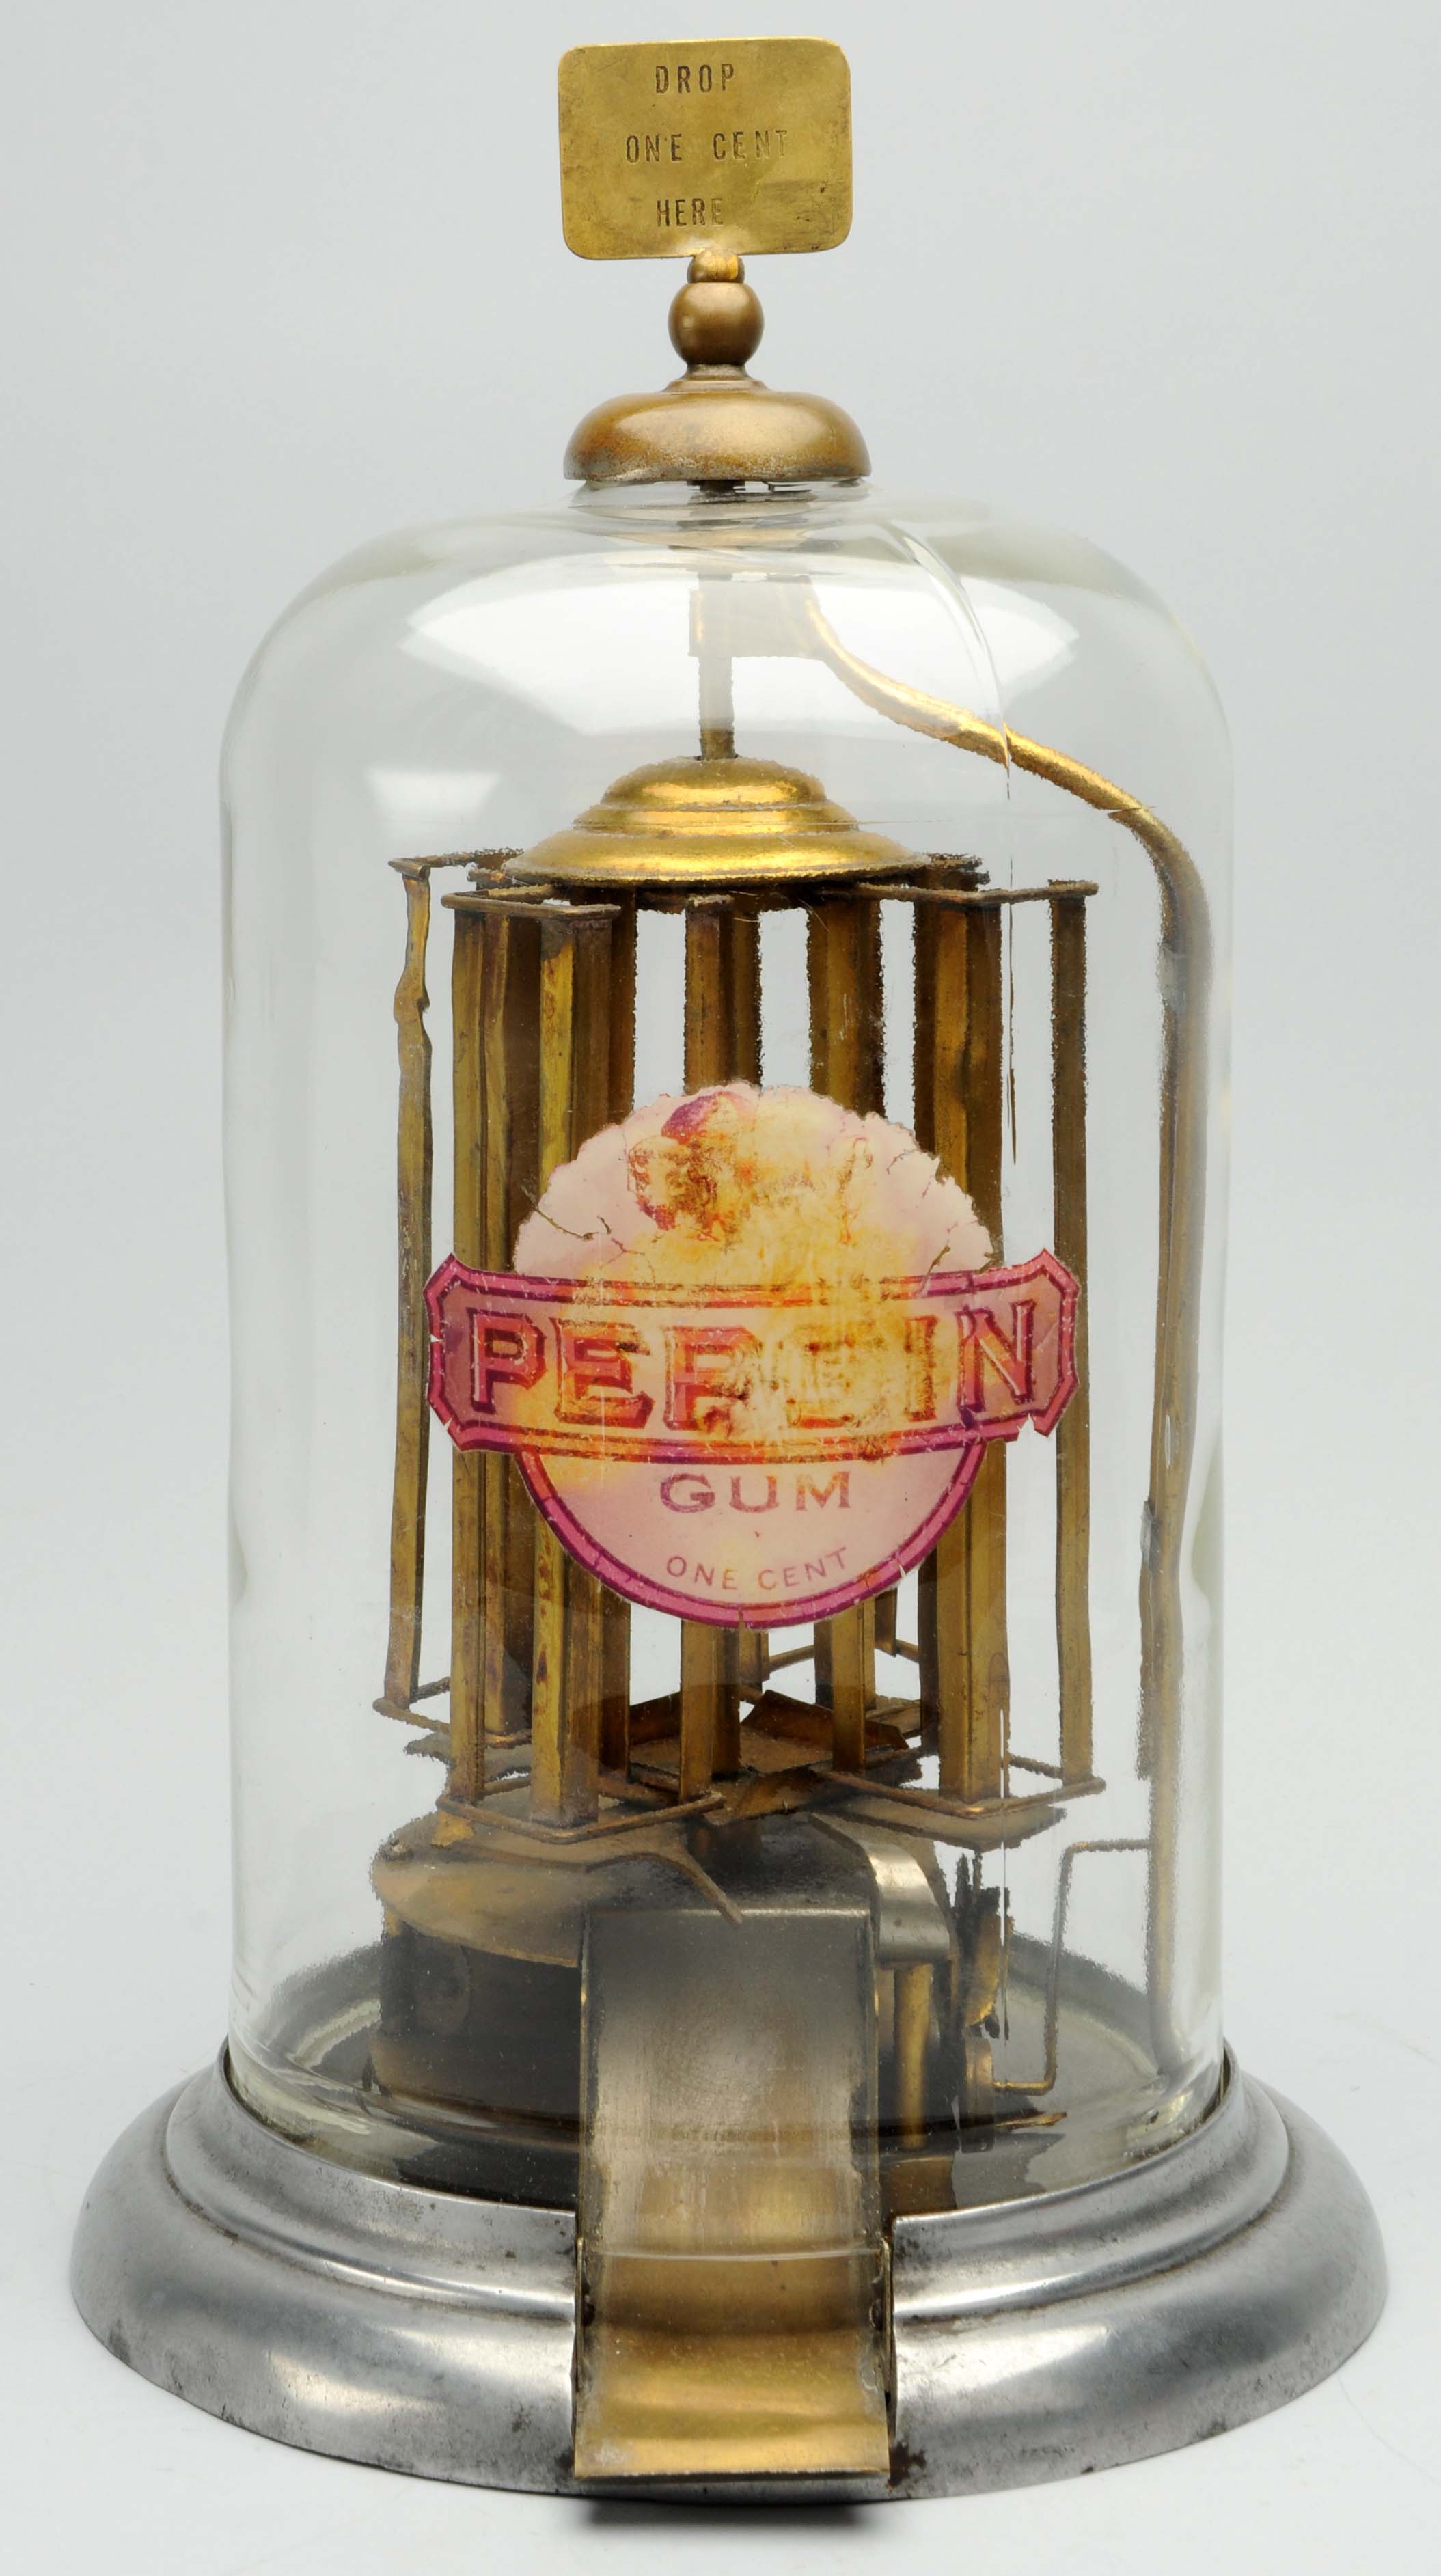 Buffalo Pepsin Gum 1-cent vending machine with brass marquee. Est. $5,000-$8,000. Morphy Auctions image.